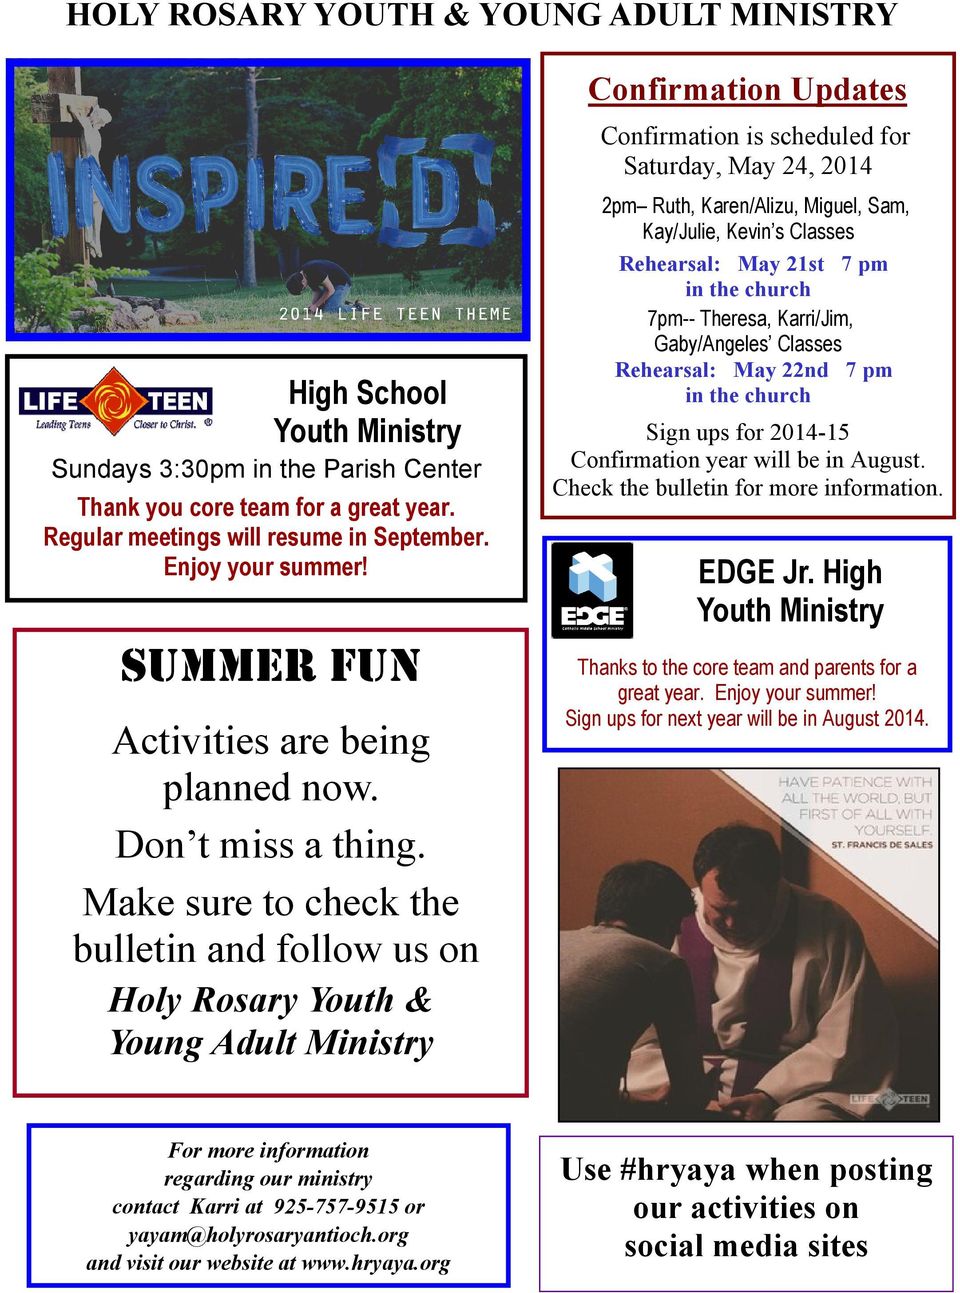 Make sure to check the bulletin and follow us on Holy Rosary Youth & Young Adult Ministry 2pm Ruth, Karen/Alizu, Miguel, Sam, Kay/Julie, Kevin s Classes Rehearsal: May 21st 7 pm in the church 7pm--